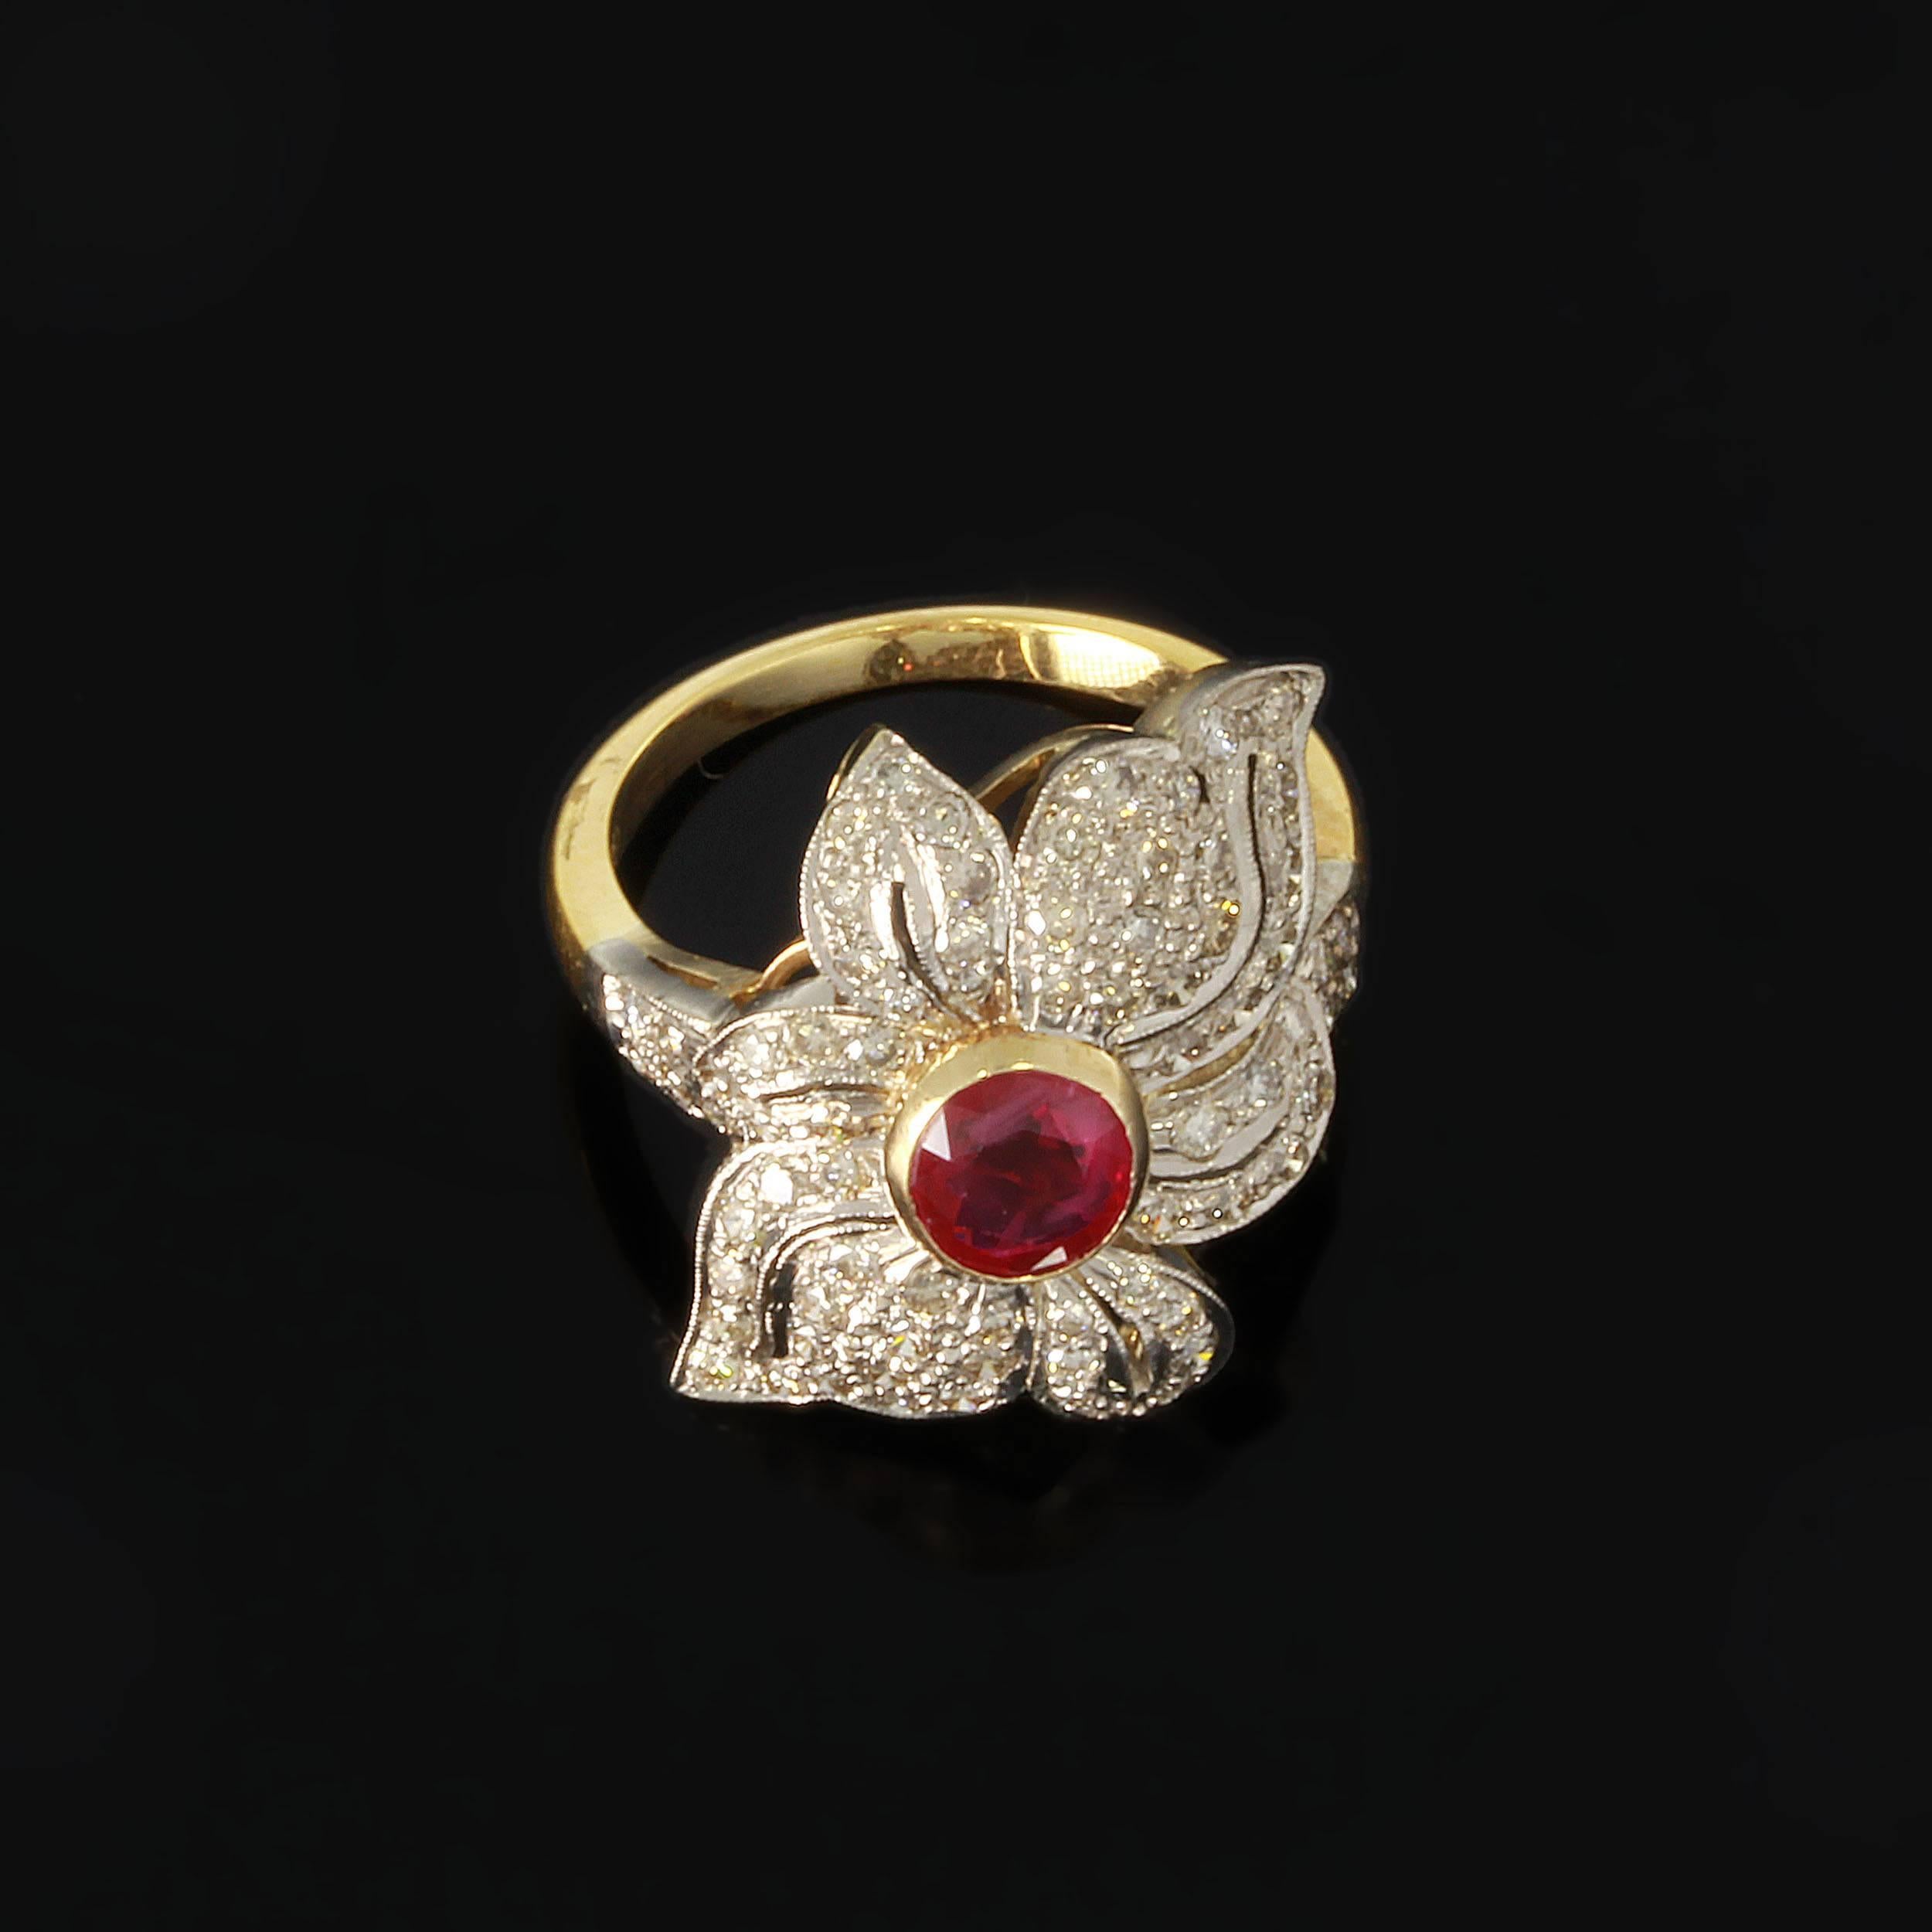 Designed ca. 1990s as a pavé set with an oval-cut ruby weighing approximately 1,18 carats and brilliant-cut diamonds weighing circa 1,15ct. Mounted in 18K yellow gold. Millegrain setting. Hallmarked inside with the purity 750. Total weight: 6,99